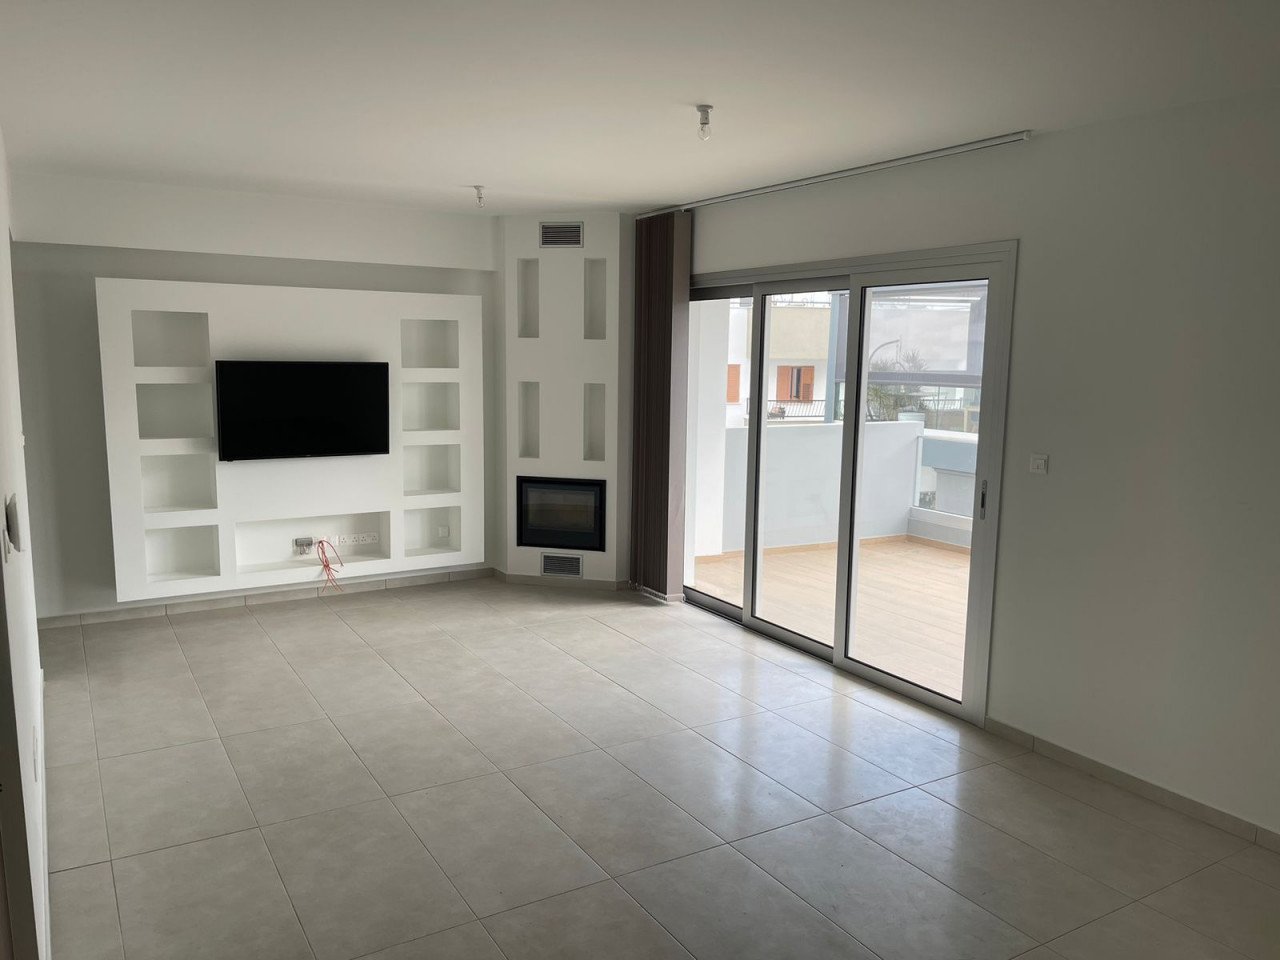 Property for Rent: Apartment (Penthouse) in Strovolos, Nicosia for Rent | Key Realtor Cyprus